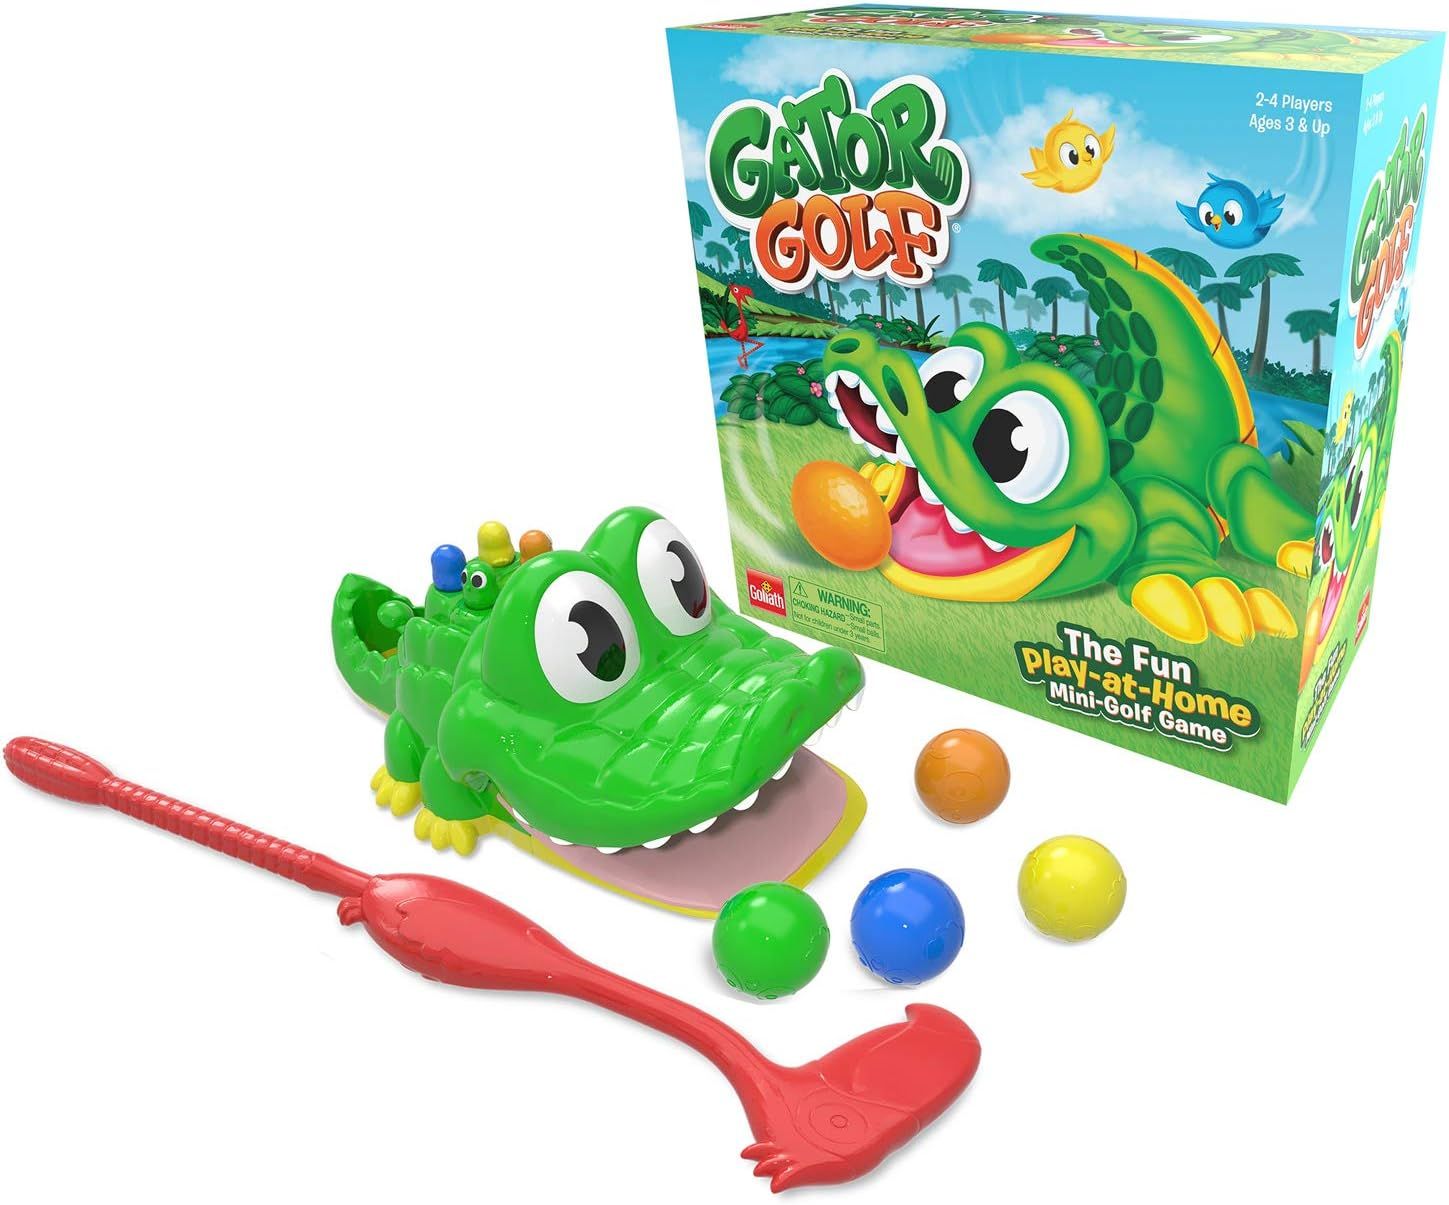 Gator Golf - Putt The Ball into The Gator's Mouth to Score Game by Goliath, Single, Gator Golf, 2... | Amazon (US)